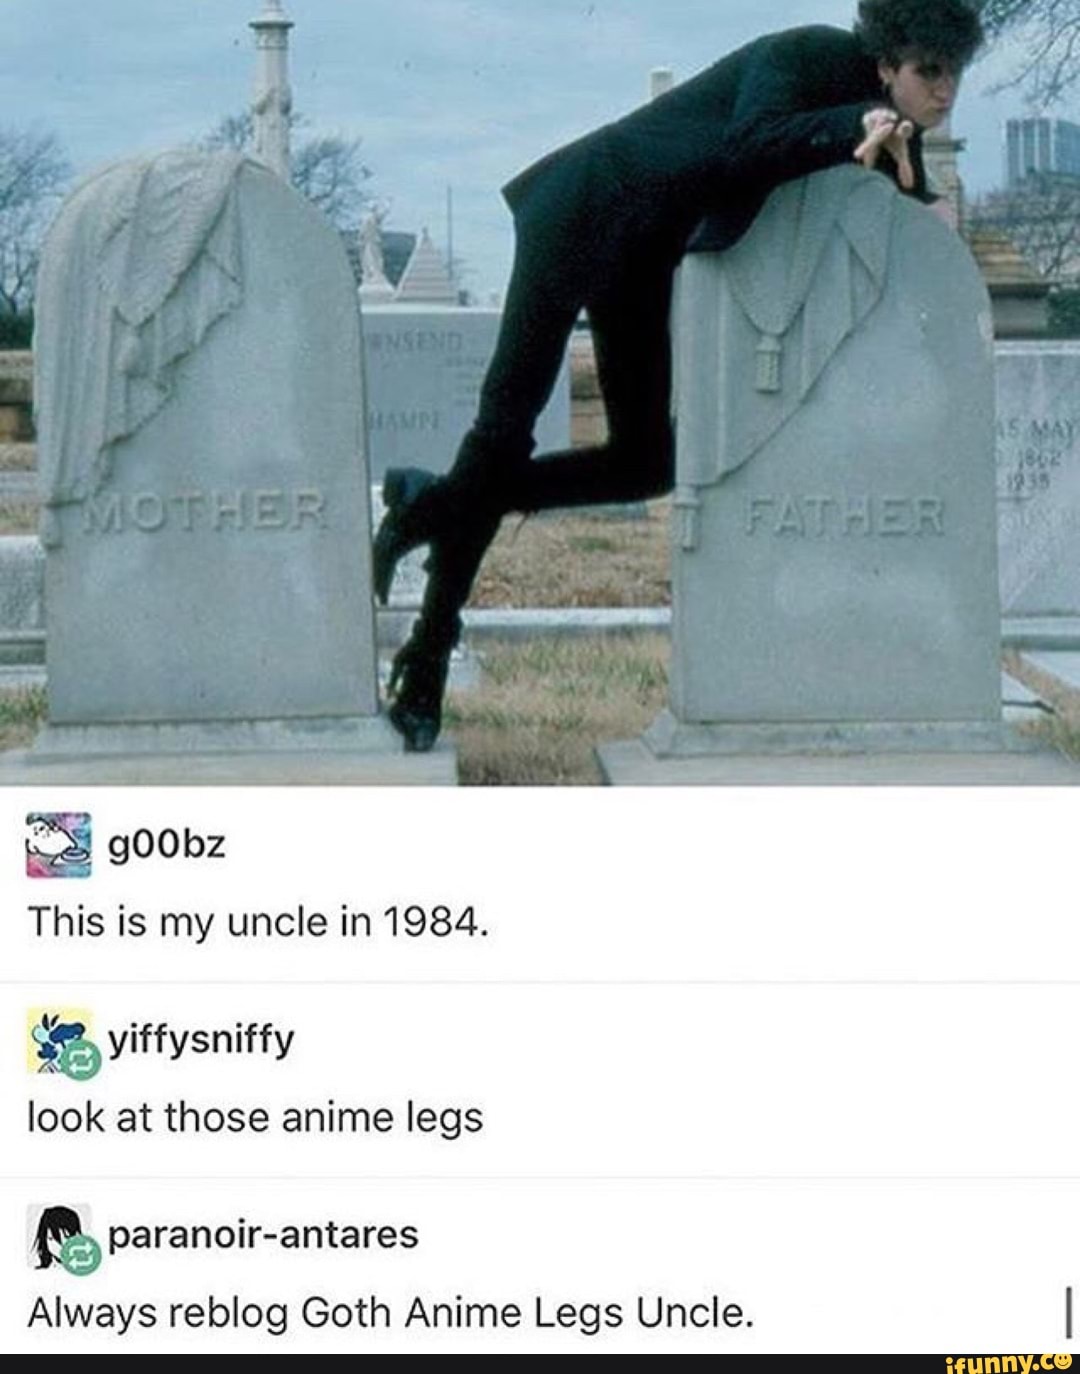 Goth anime legs uncle